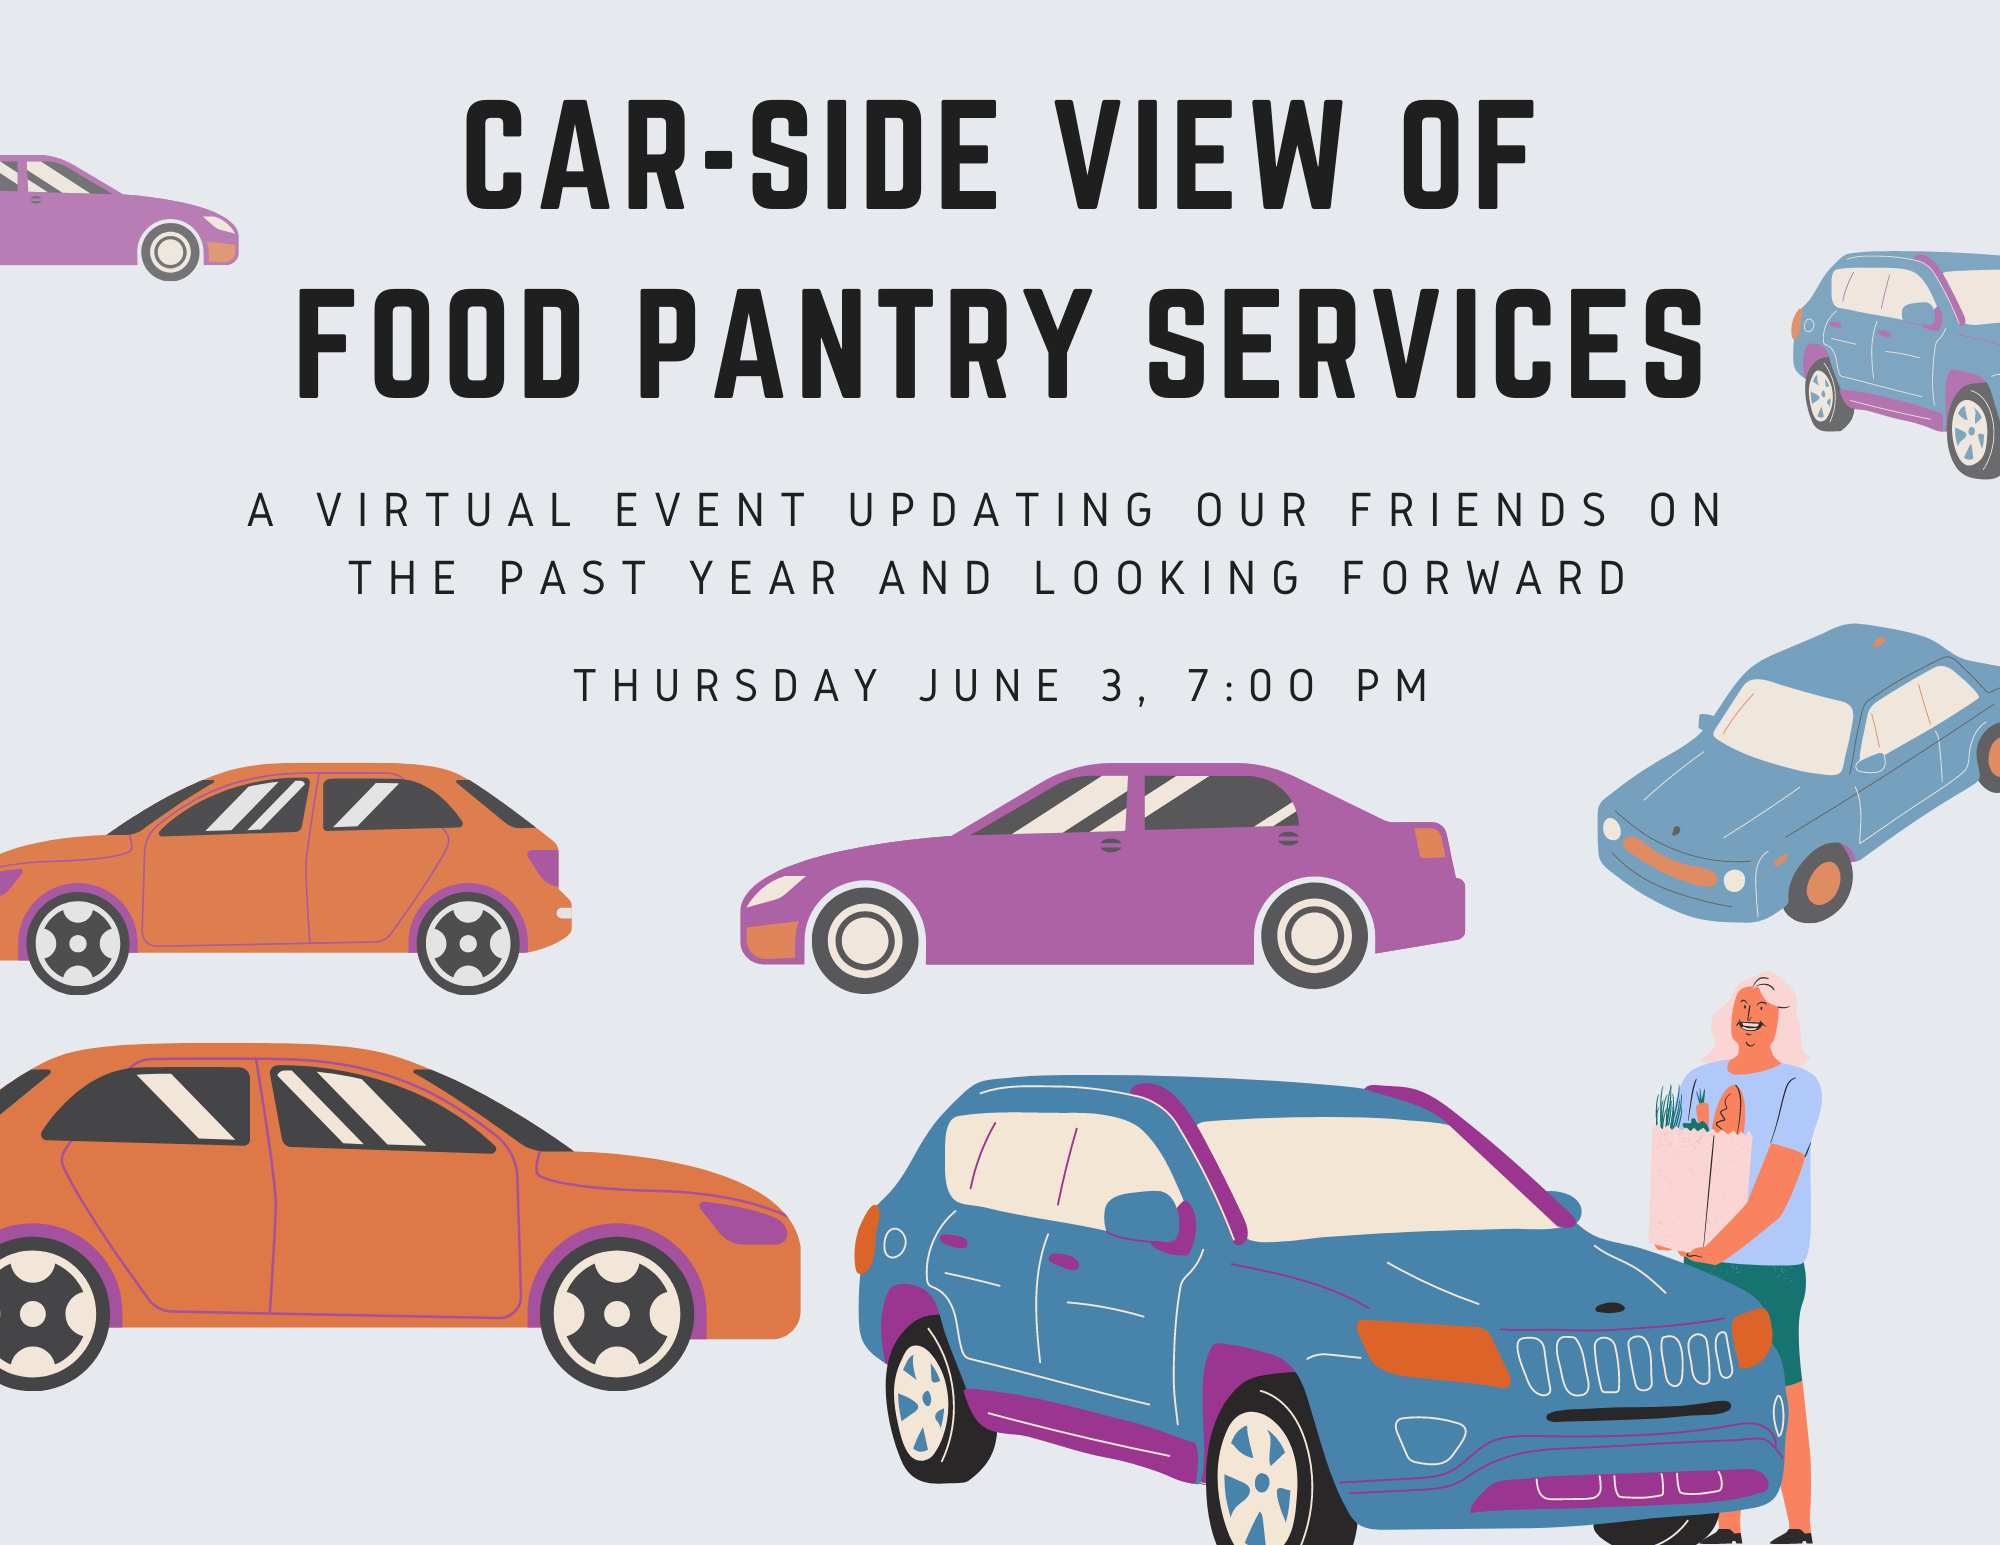 Car-side view of food pantry services. Event details - Thursday June 3 at 7:00 PM. image includes cars lined up to recieve groceries by a volunteer.